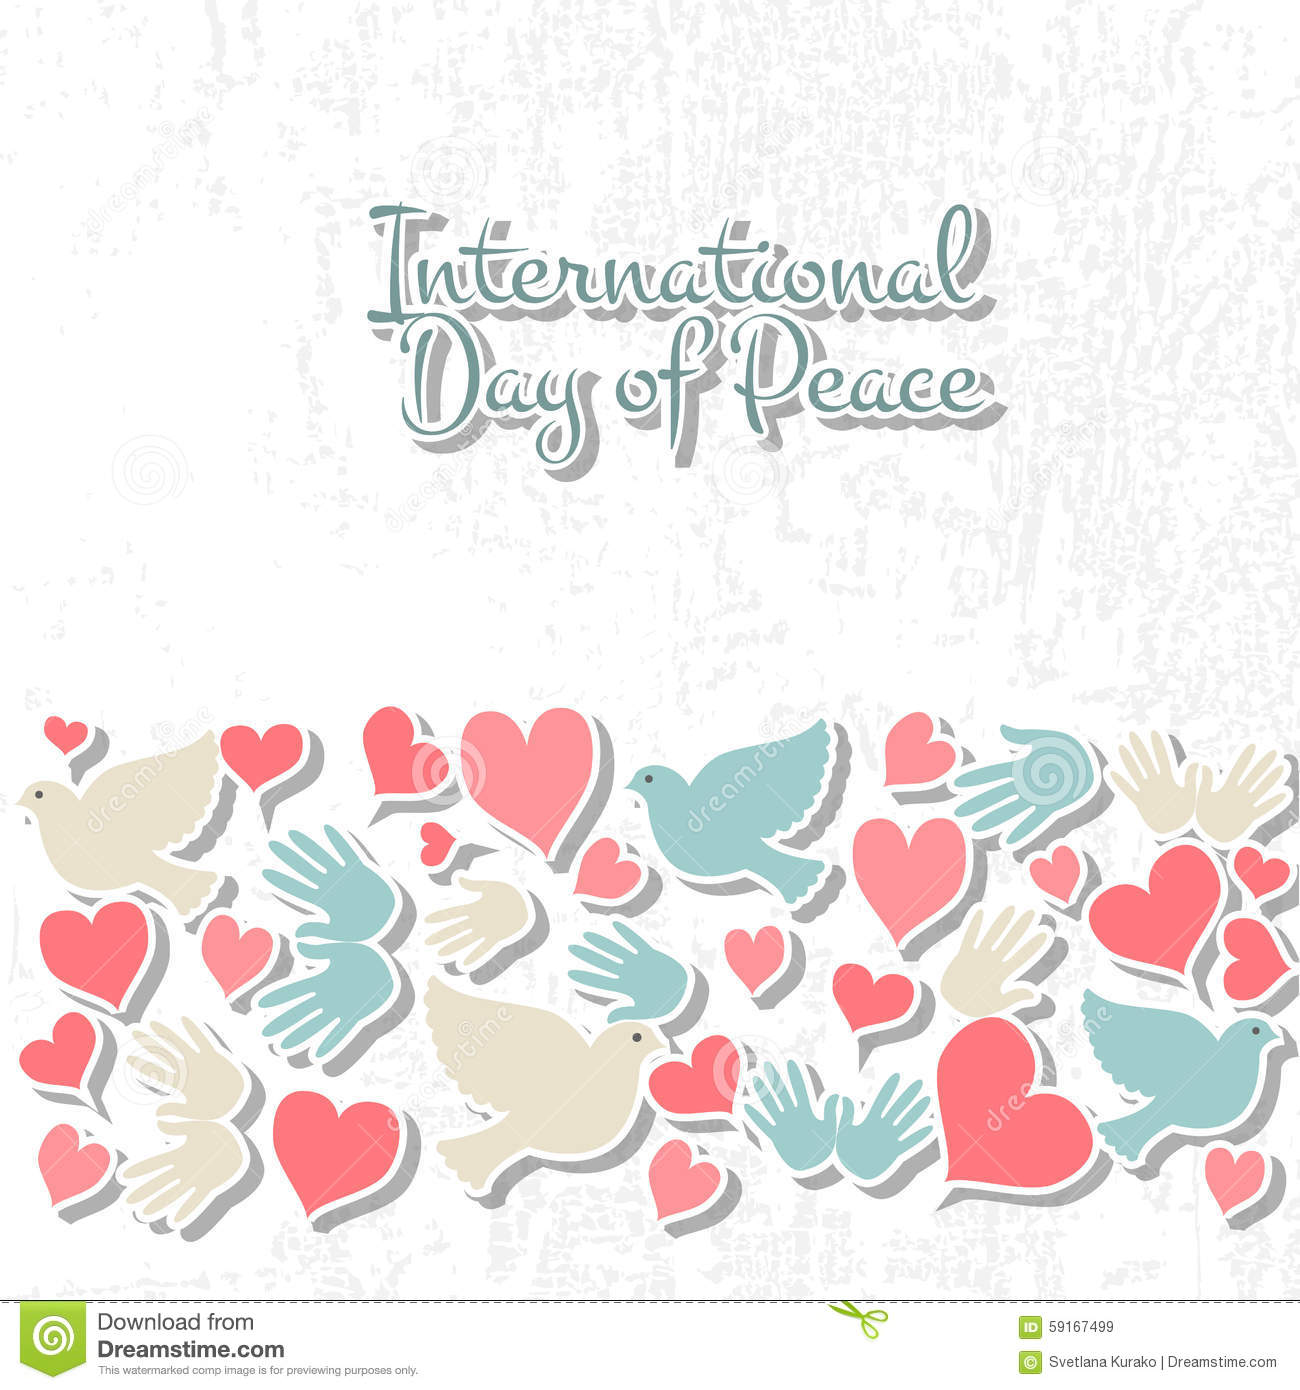 International Day Of Peace Doves And Hearts Greeting Card Image